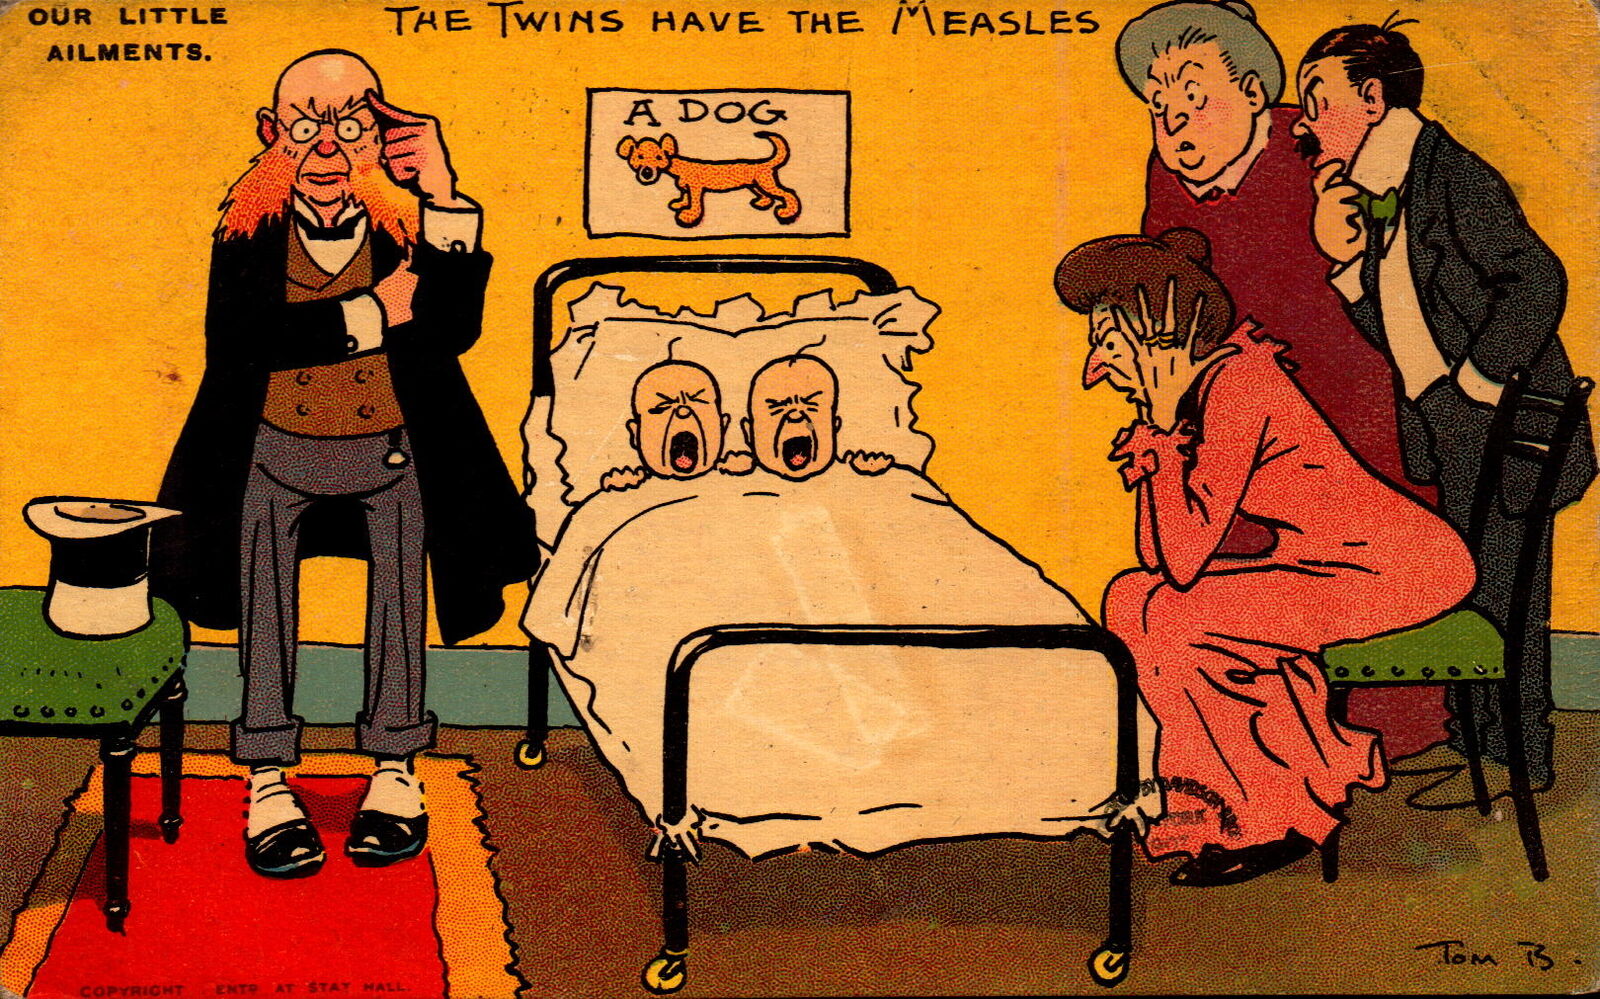 Vintage Postcard Comic Card Twins Have the Measles Our Little Ailments Tom B. 